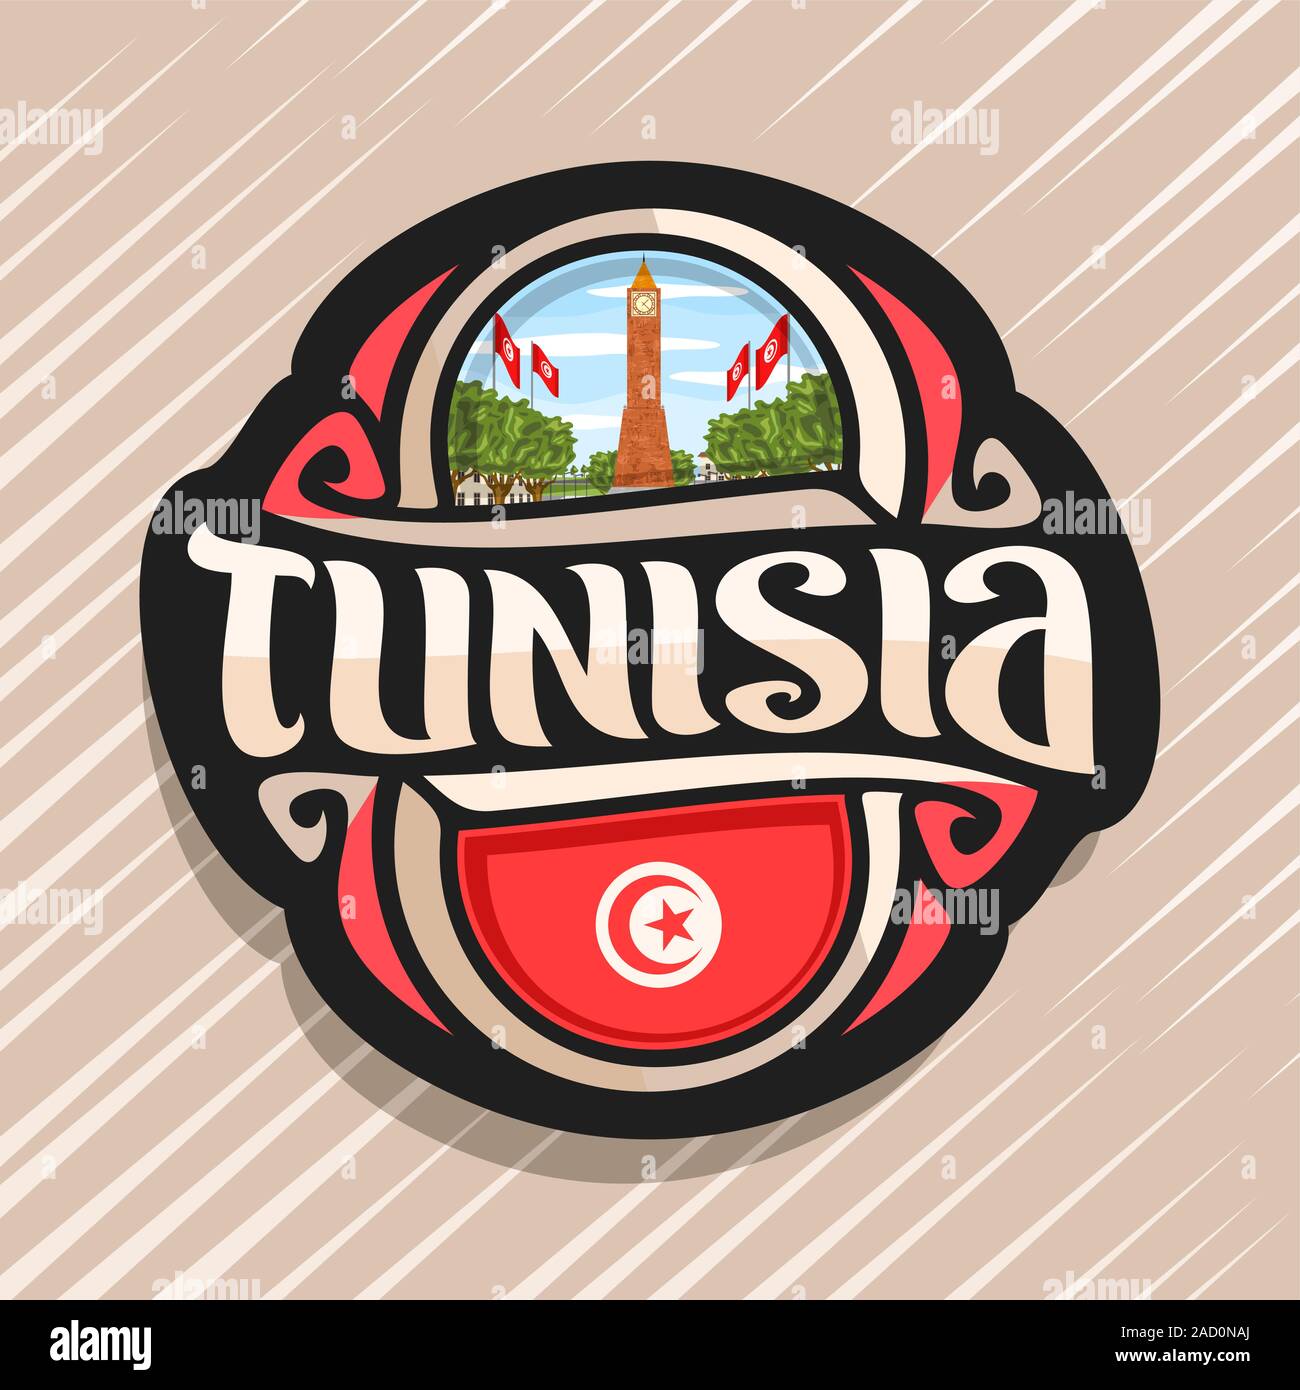 Vector logo for Tunisia country, fridge magnet with tunisian state flag, original brush typeface for word tunisia and national tunisian symbol - clock Stock Vector